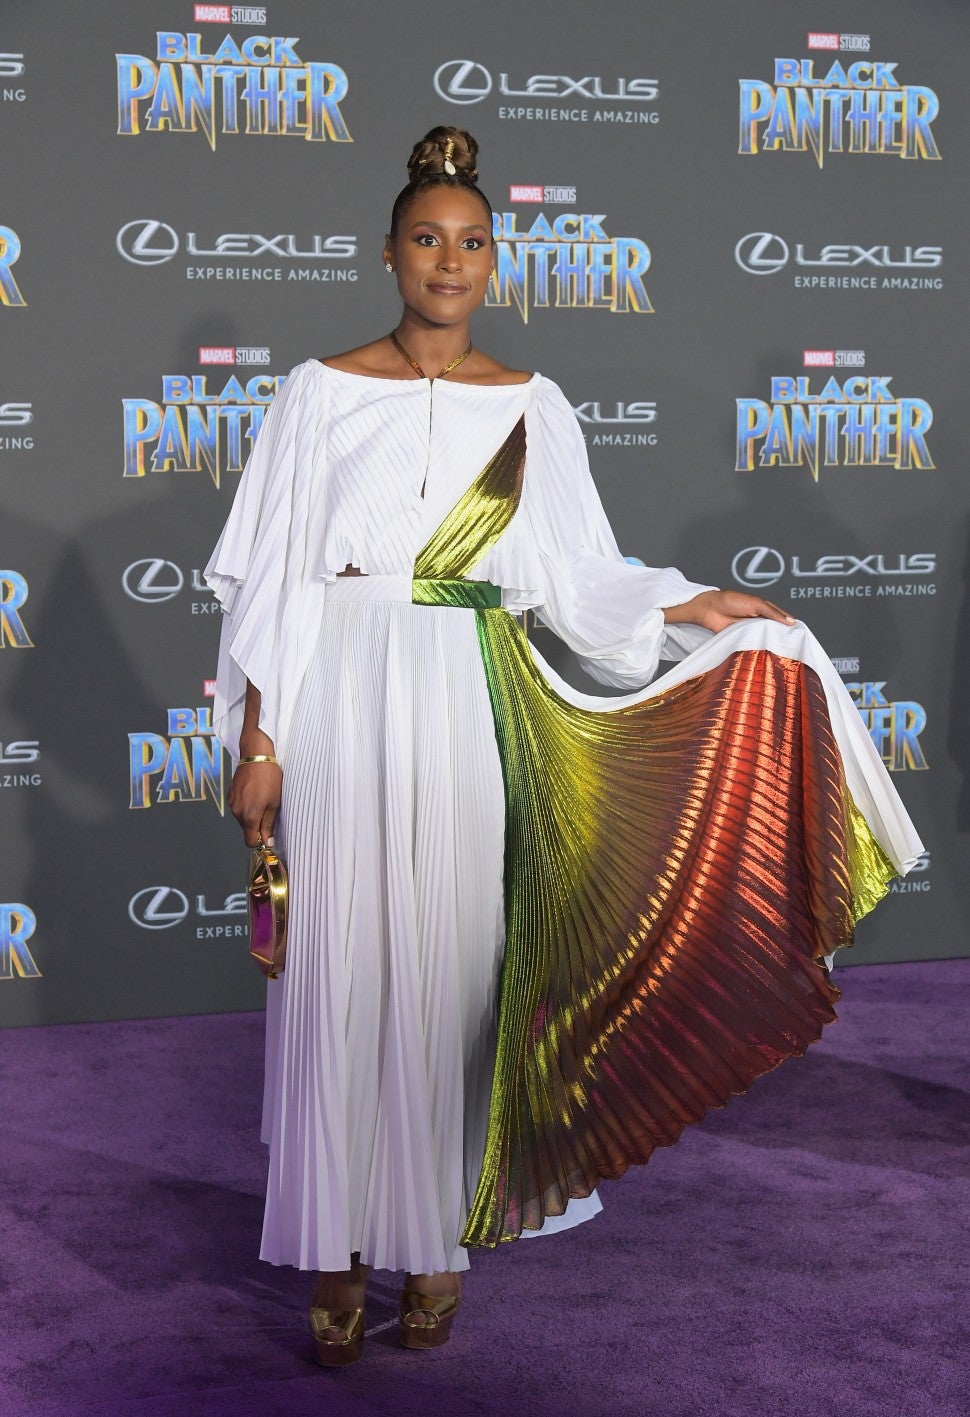 Issa Rae at Black Panther premiere